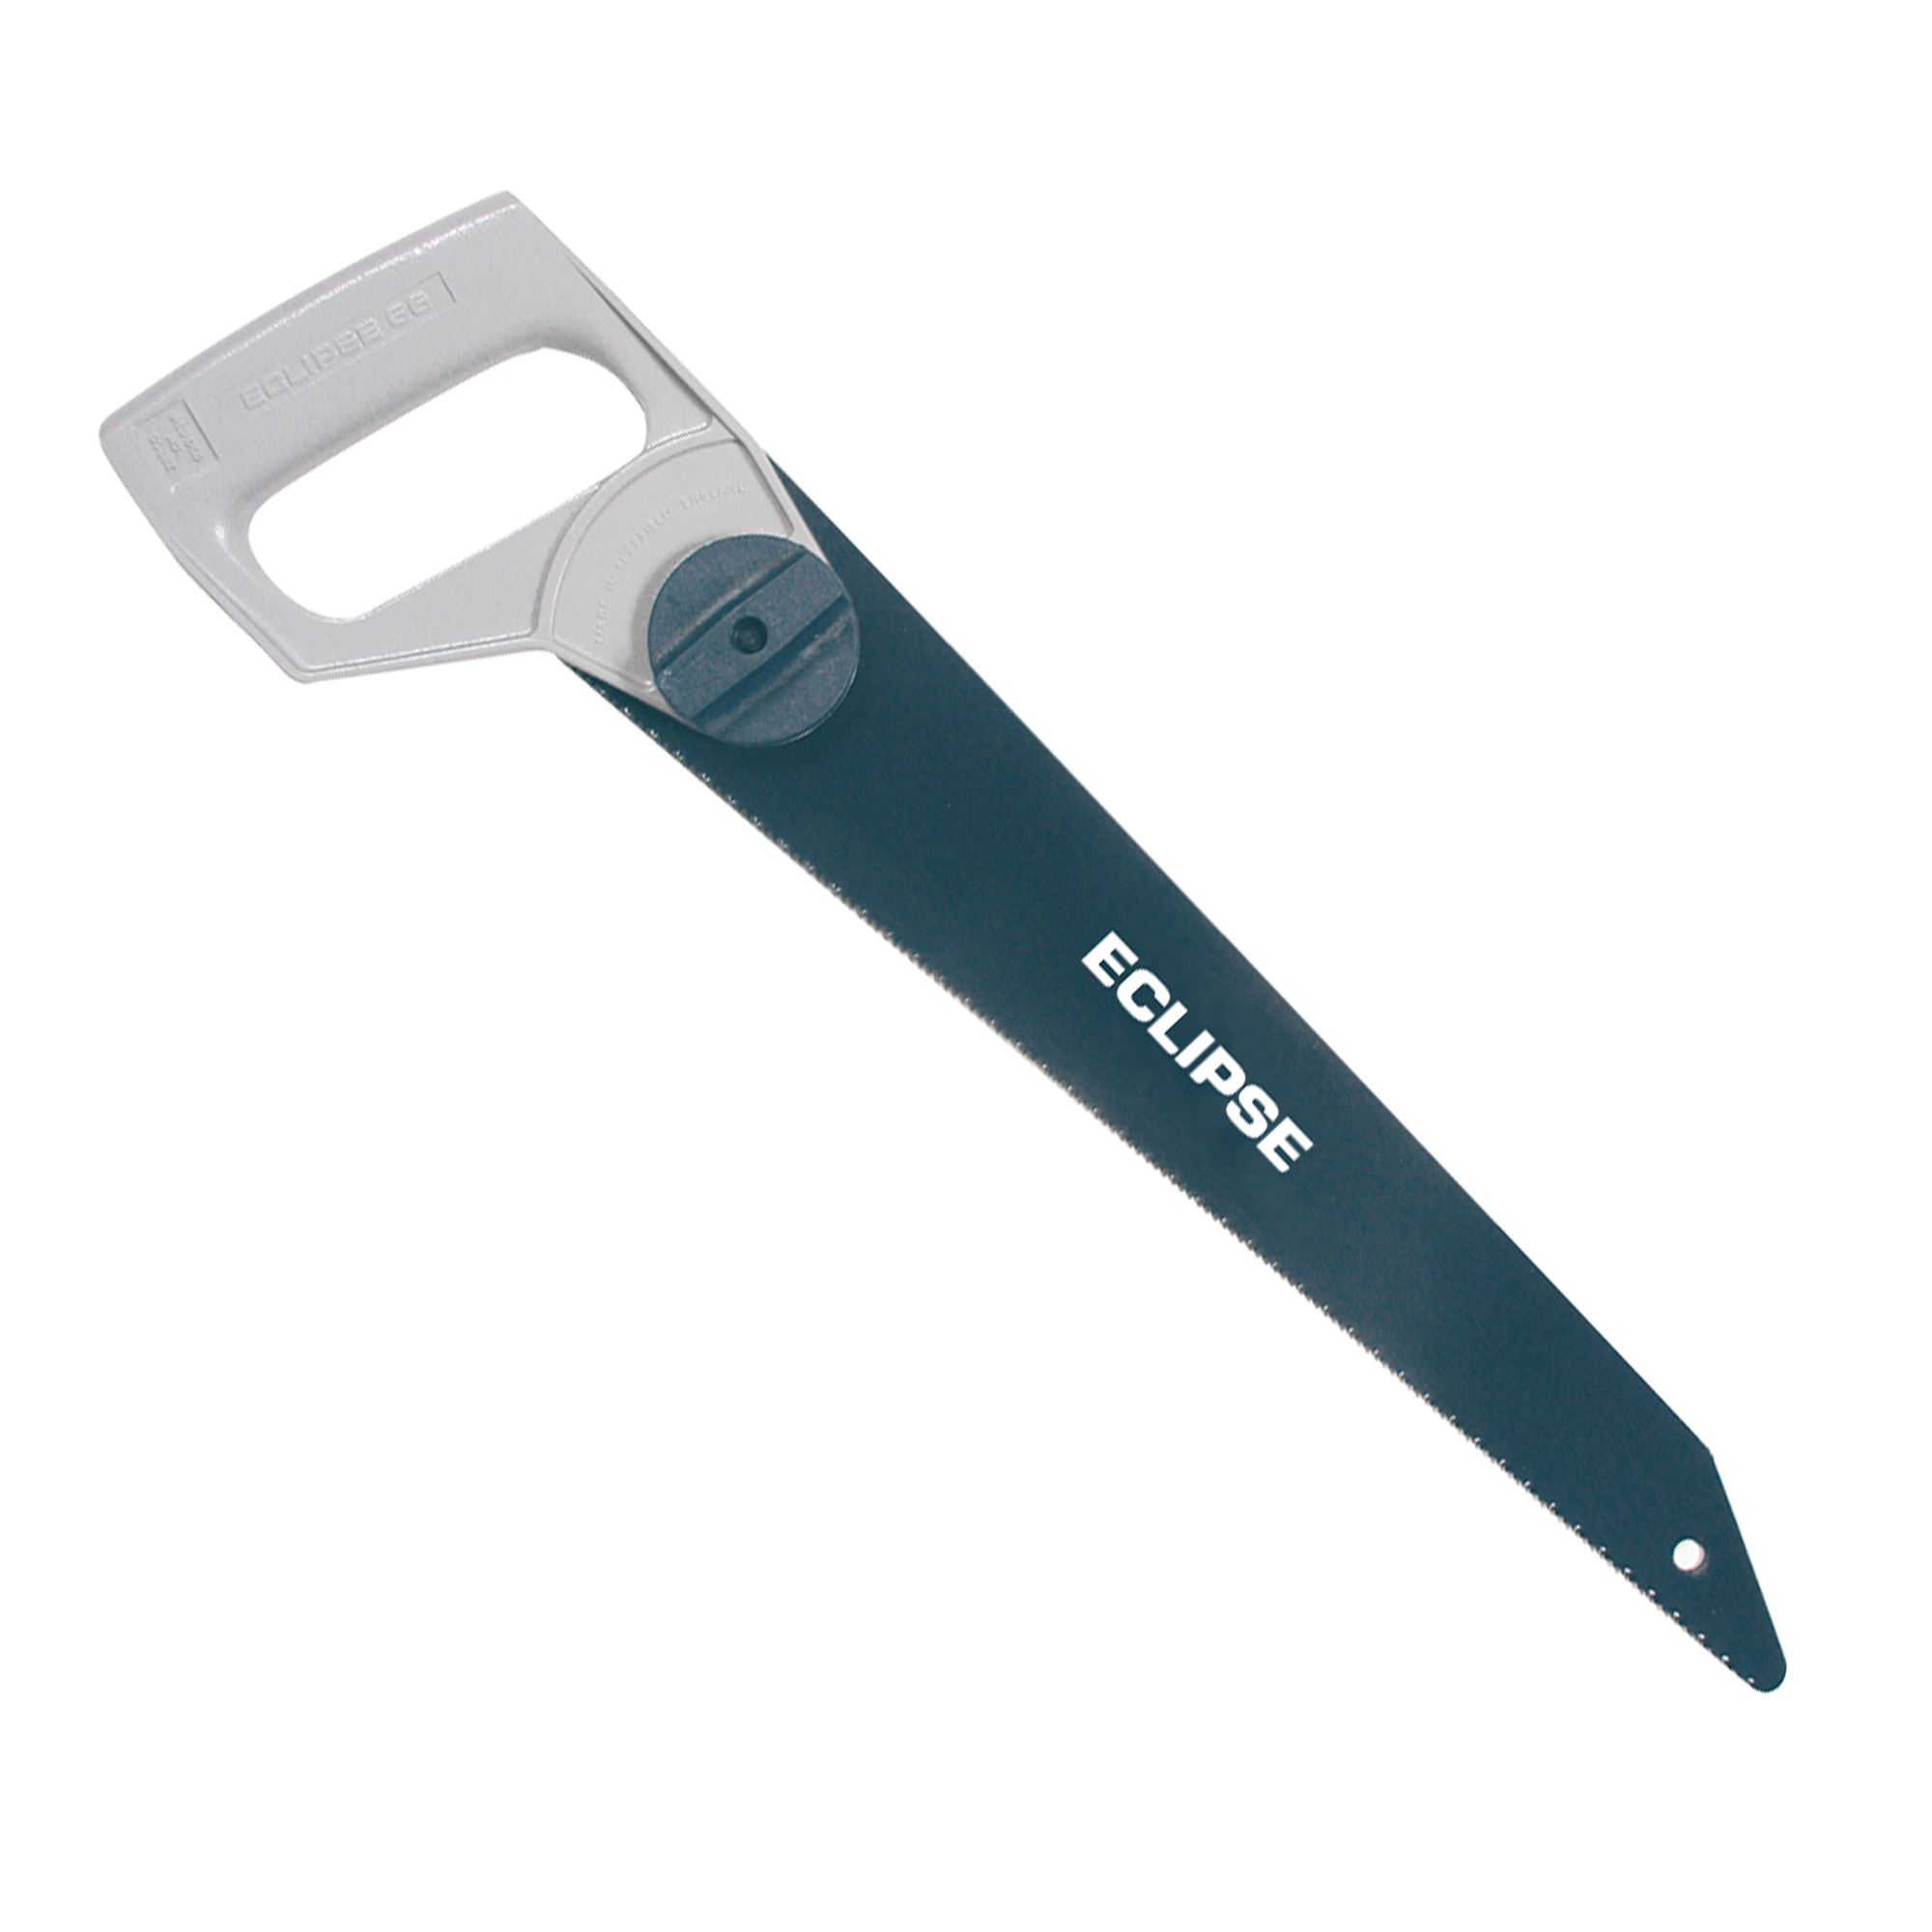 Hand Saw General Purpose - SJ-72/66XR by Eclipse